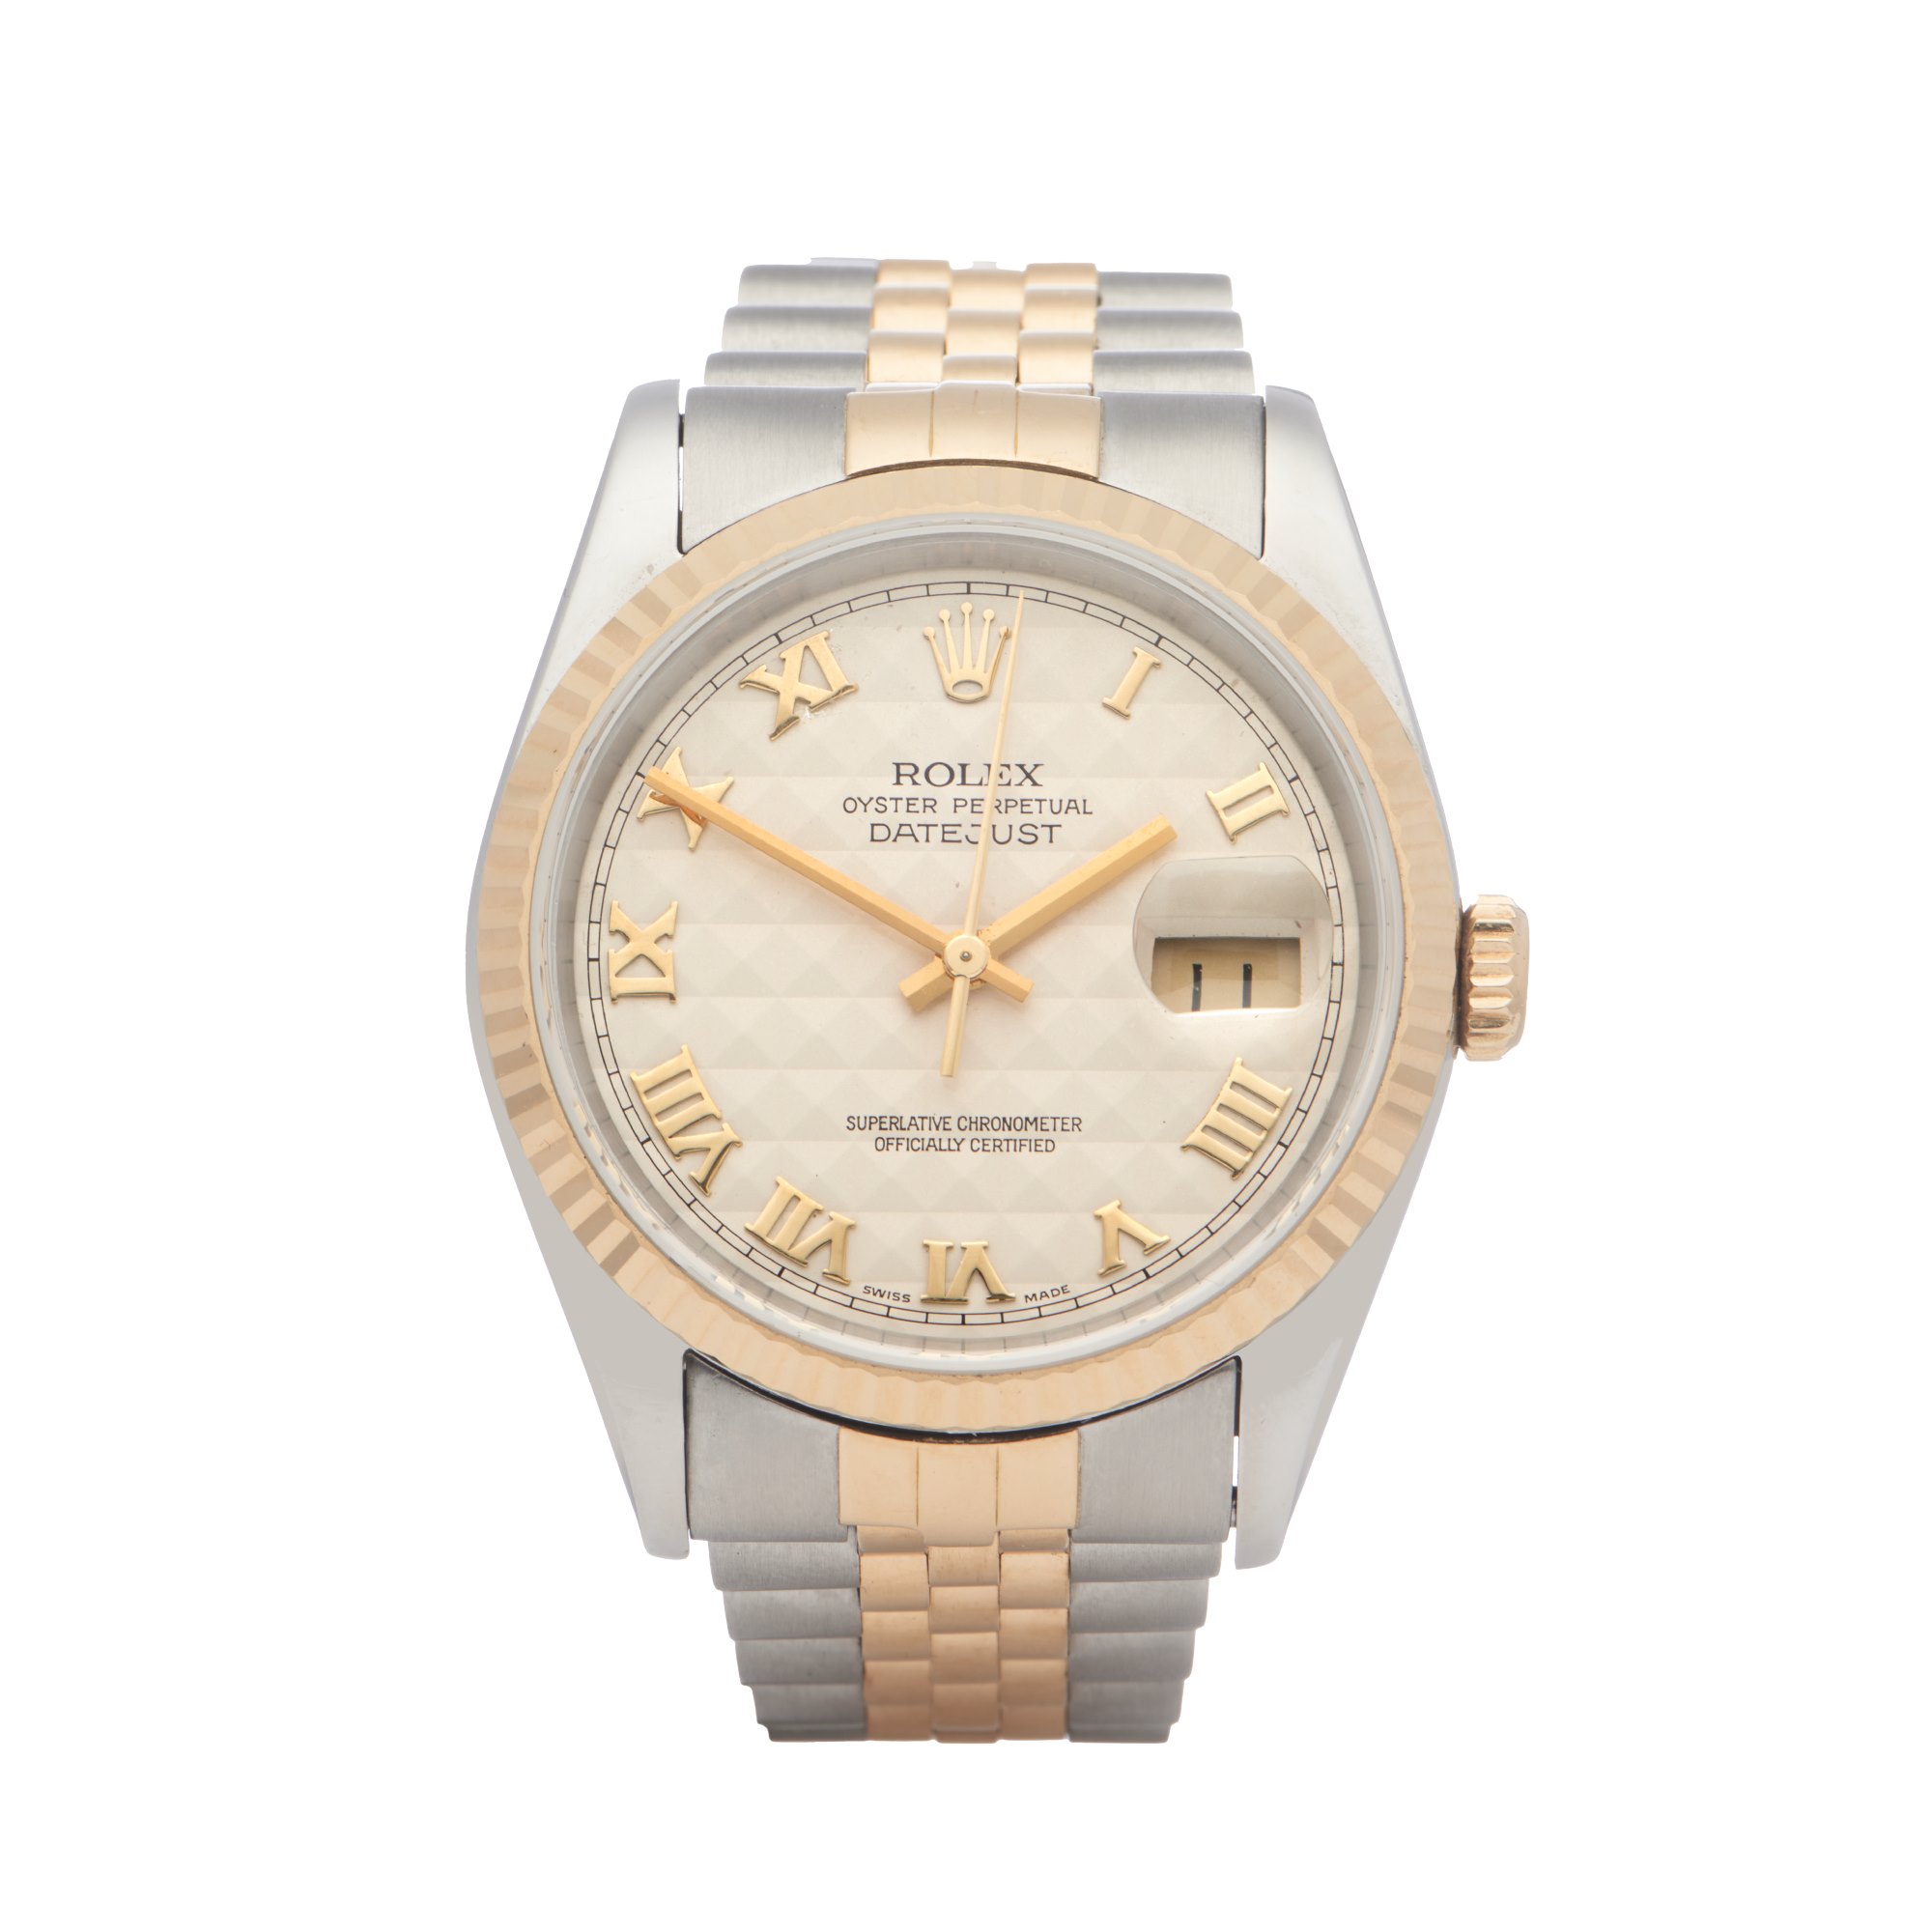 Rolex Datejust 36 Pyramid Dial 18K Yellow Gold & Stainless Steel 16233